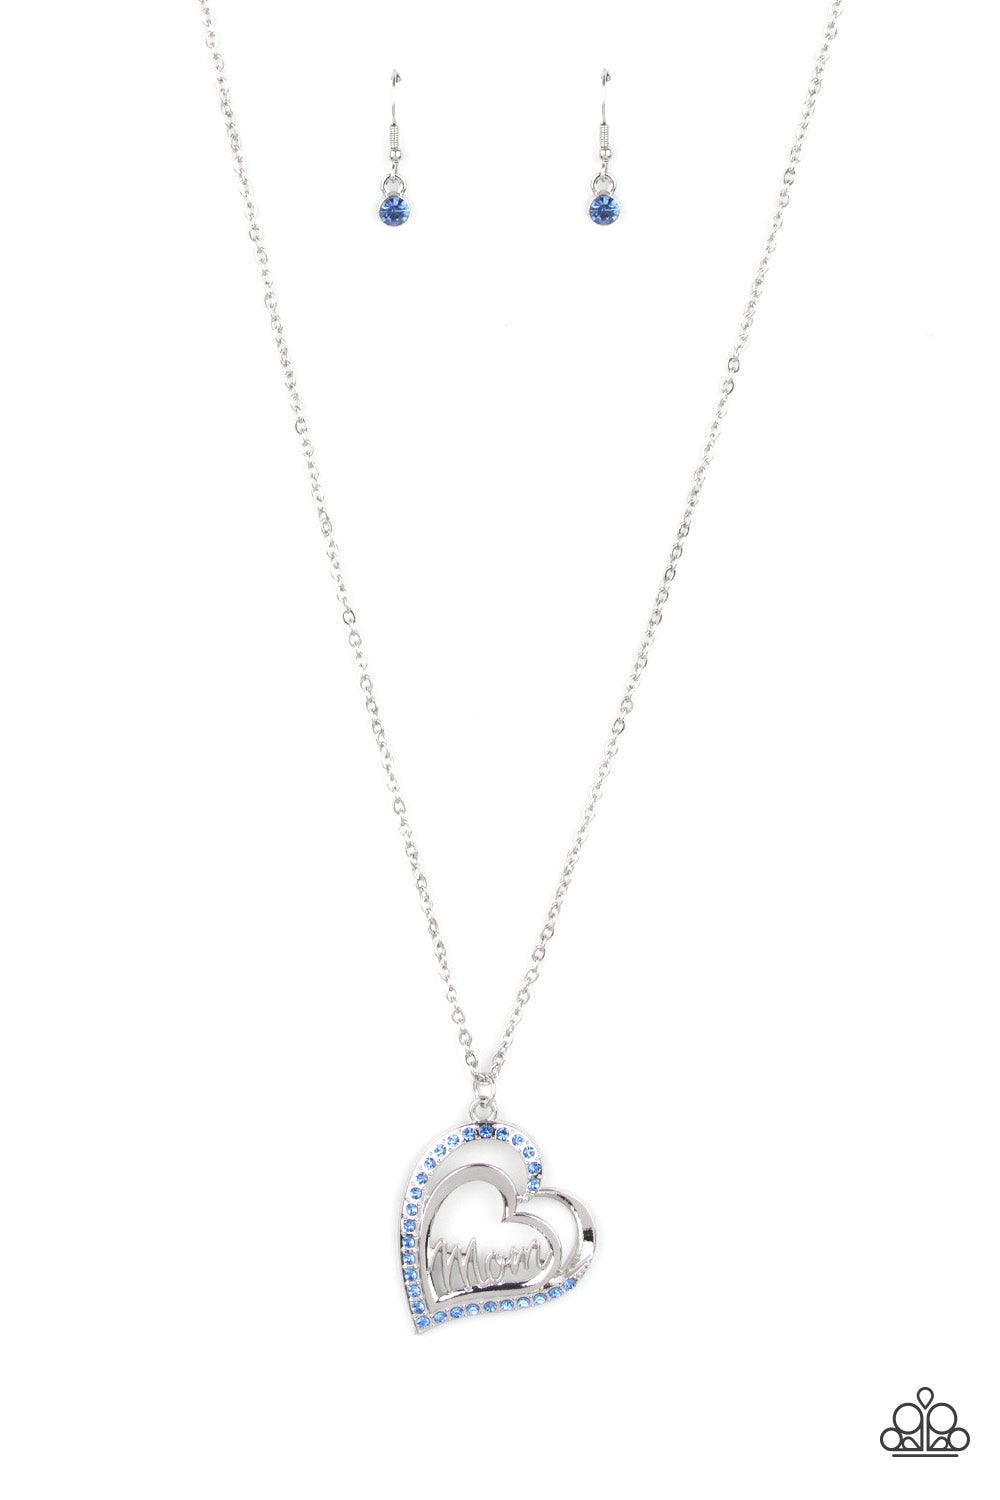 Paparazzi Accessories A Mothers Heart - Blue The word "Mom" floats inside an airy heart-shaped frame. A second heart encrusted with dewy blue rhinestones encircles the centerpiece as it sways from a lengthened silver chain for a sweet token of love. Featu